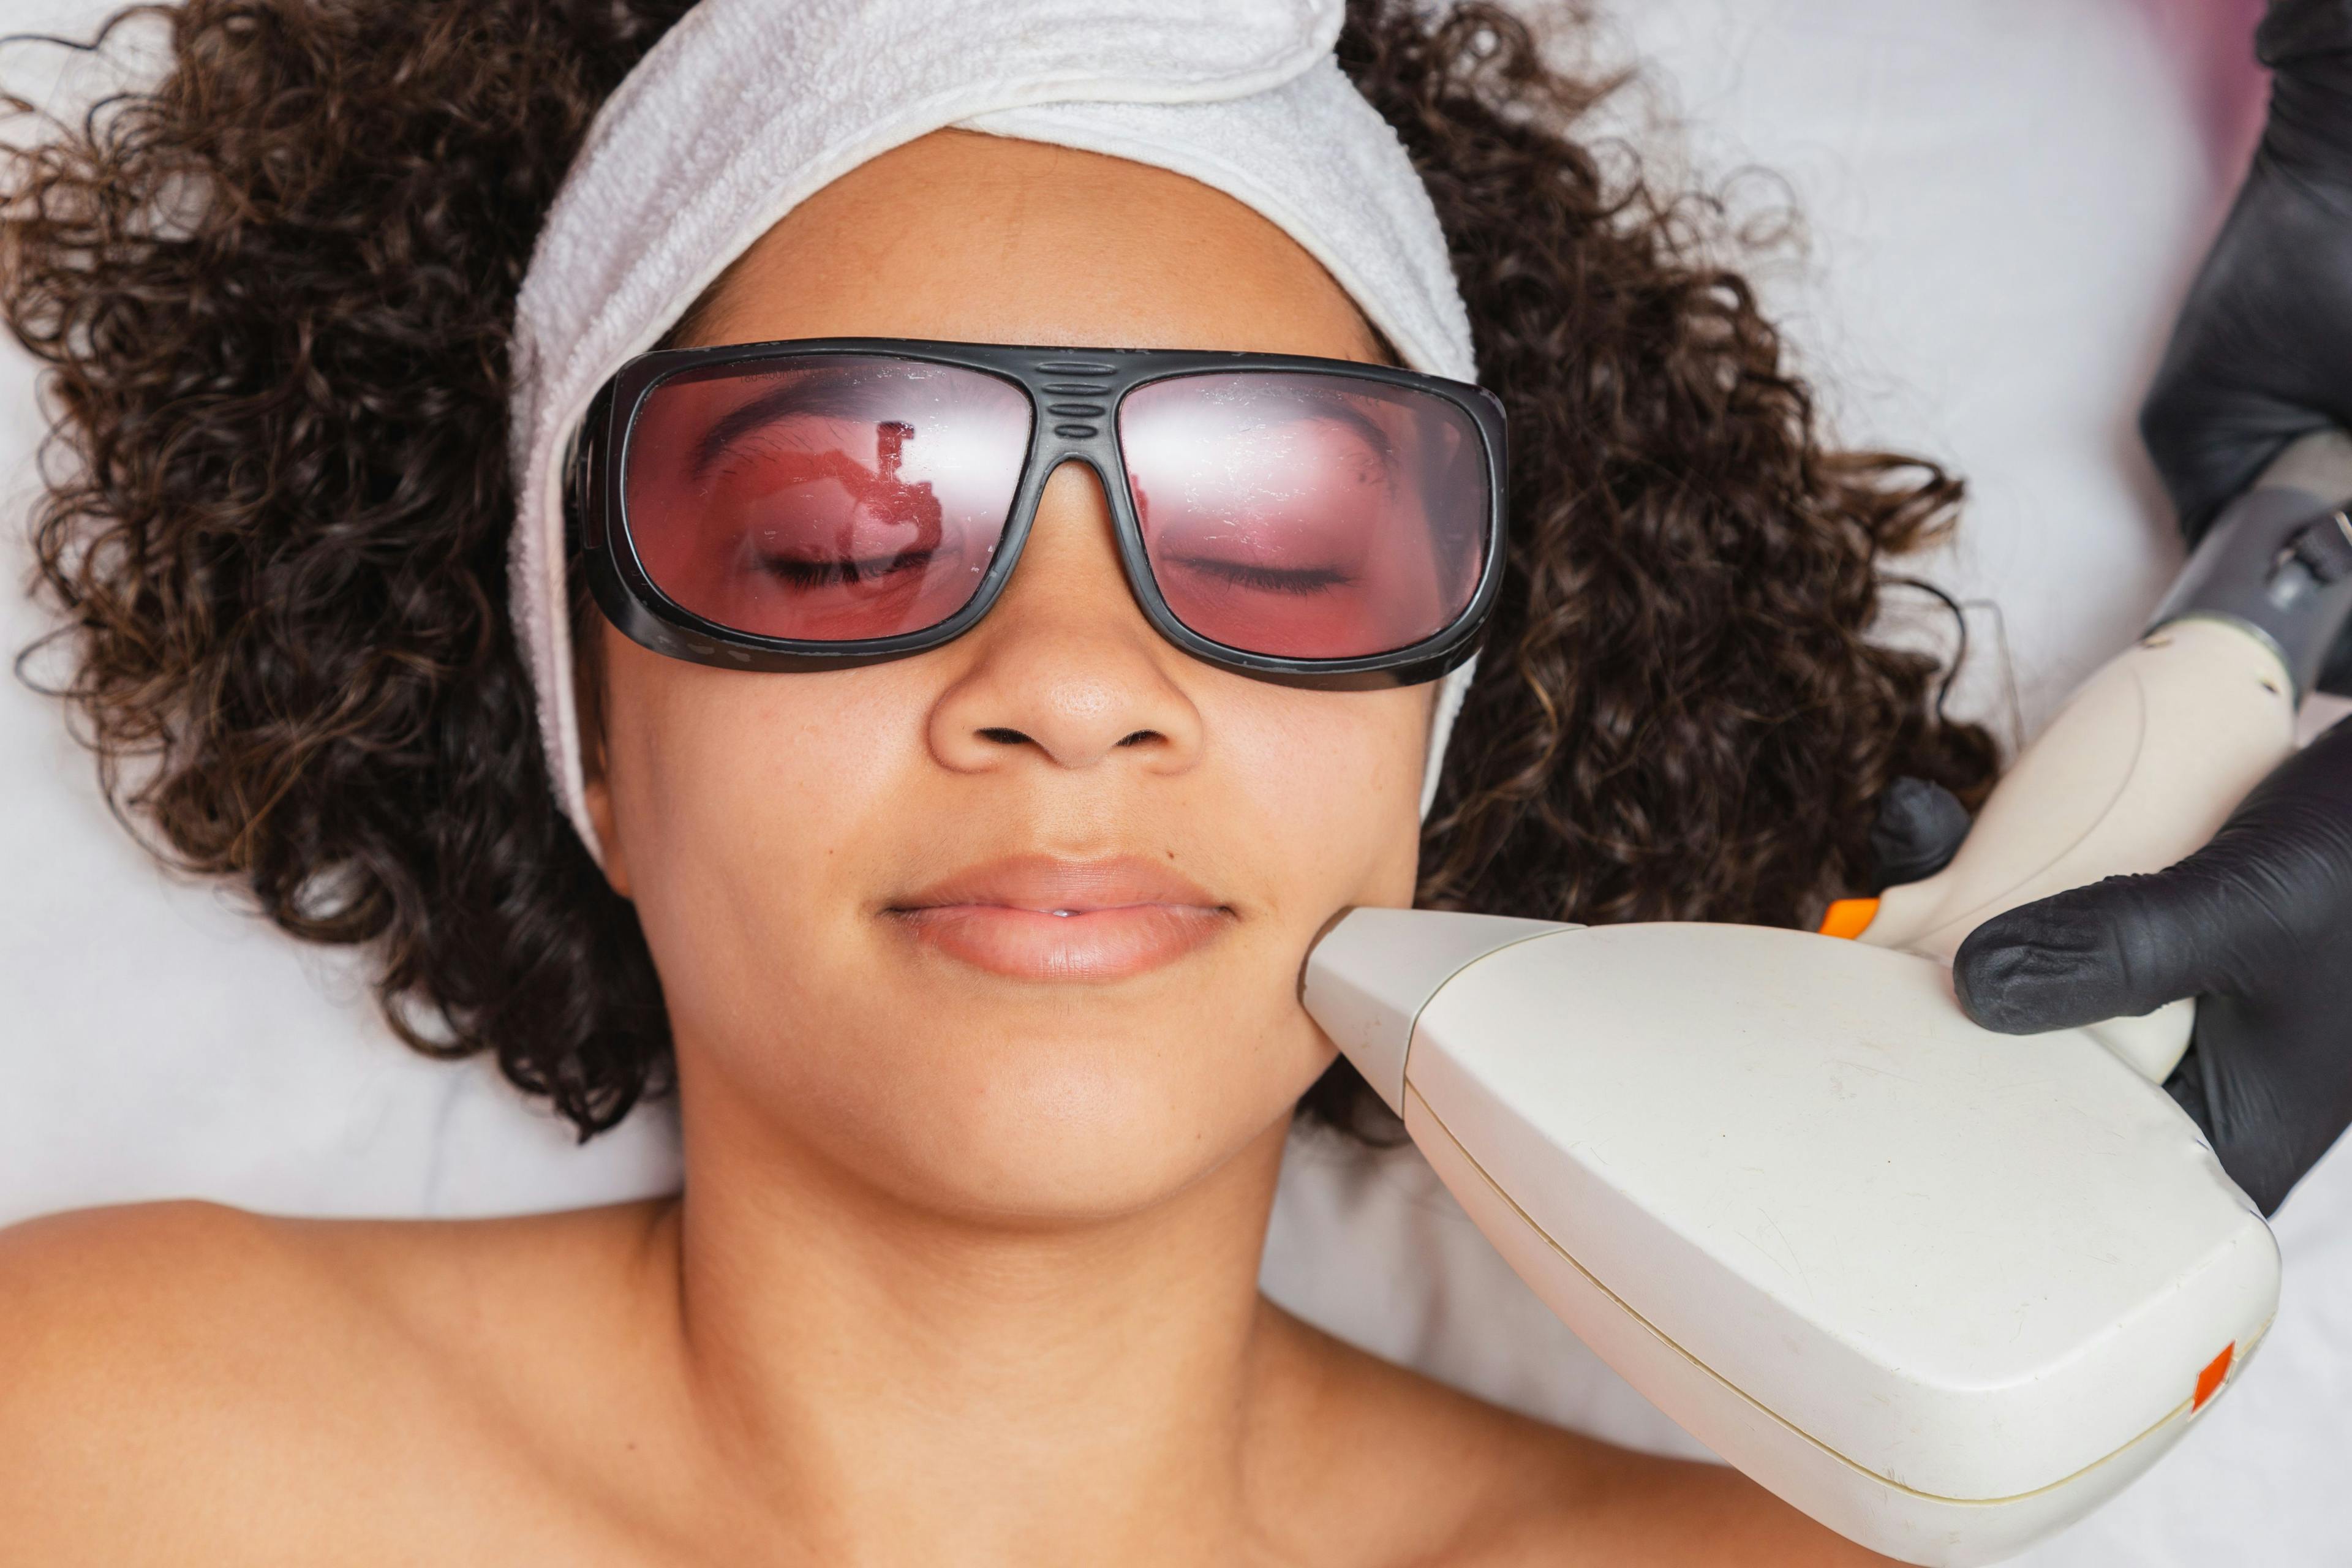 Aesthetic Procedure Considerations for Skin of Color